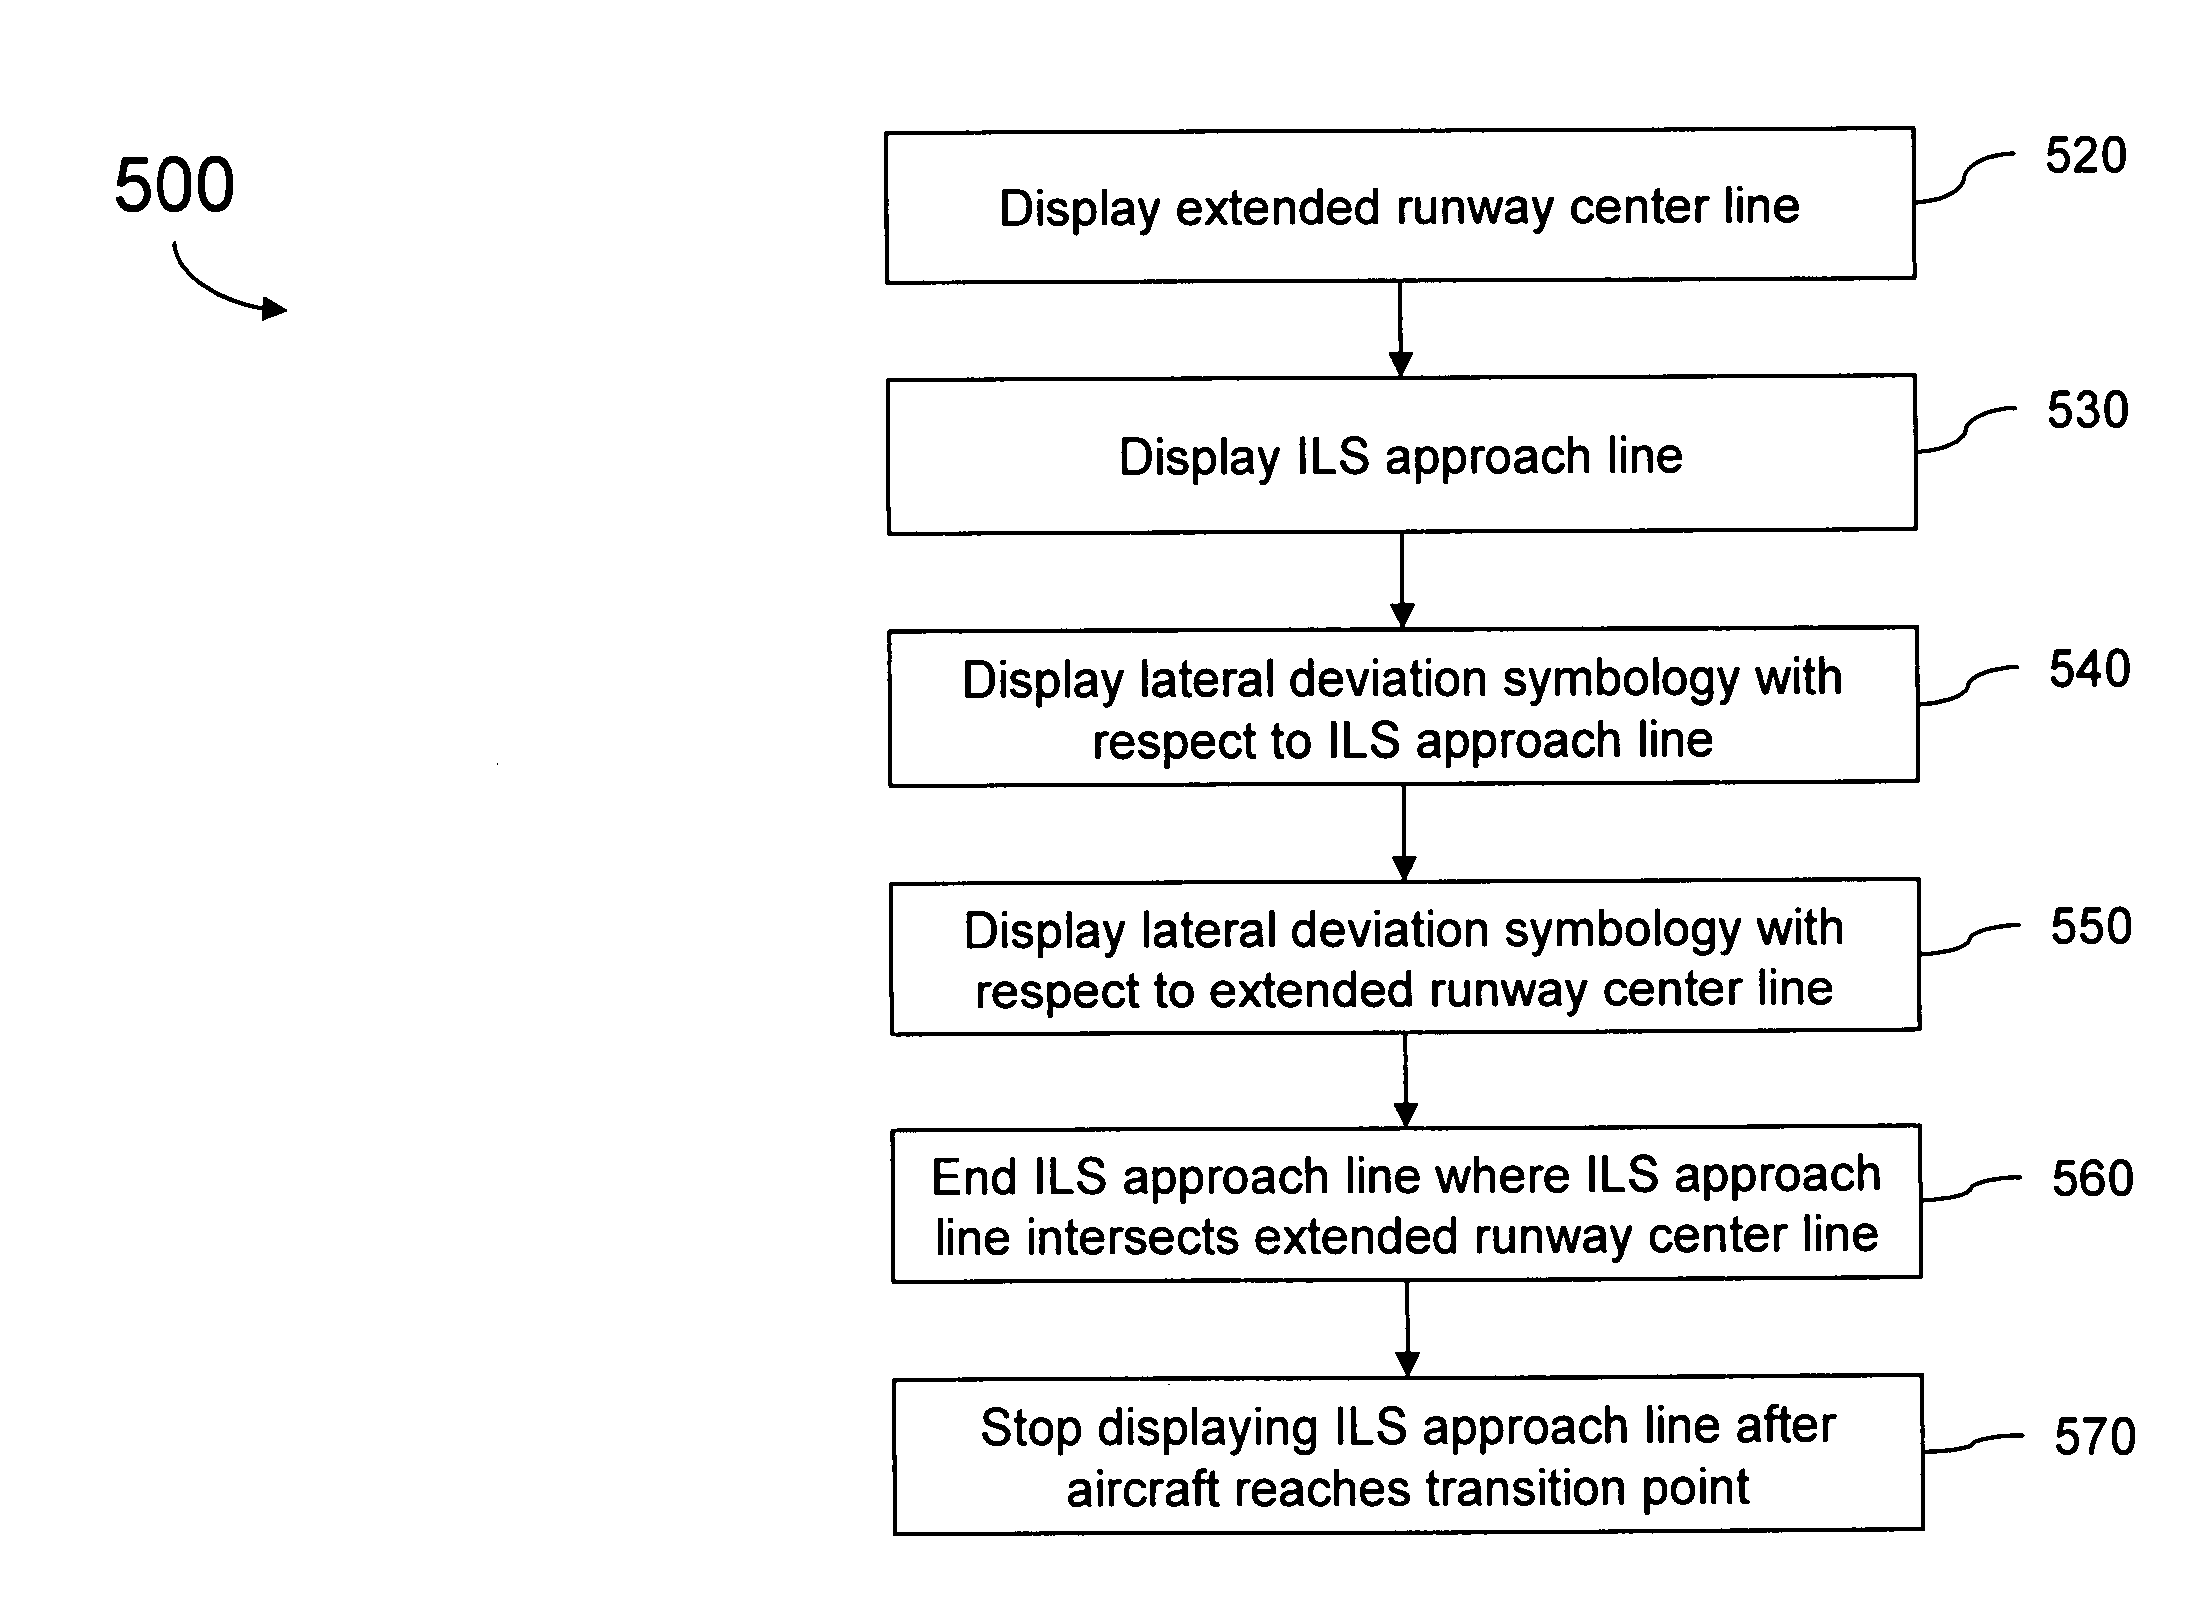 Methods and systems to accurately display lateral deviation symbology in offset approaches to runways